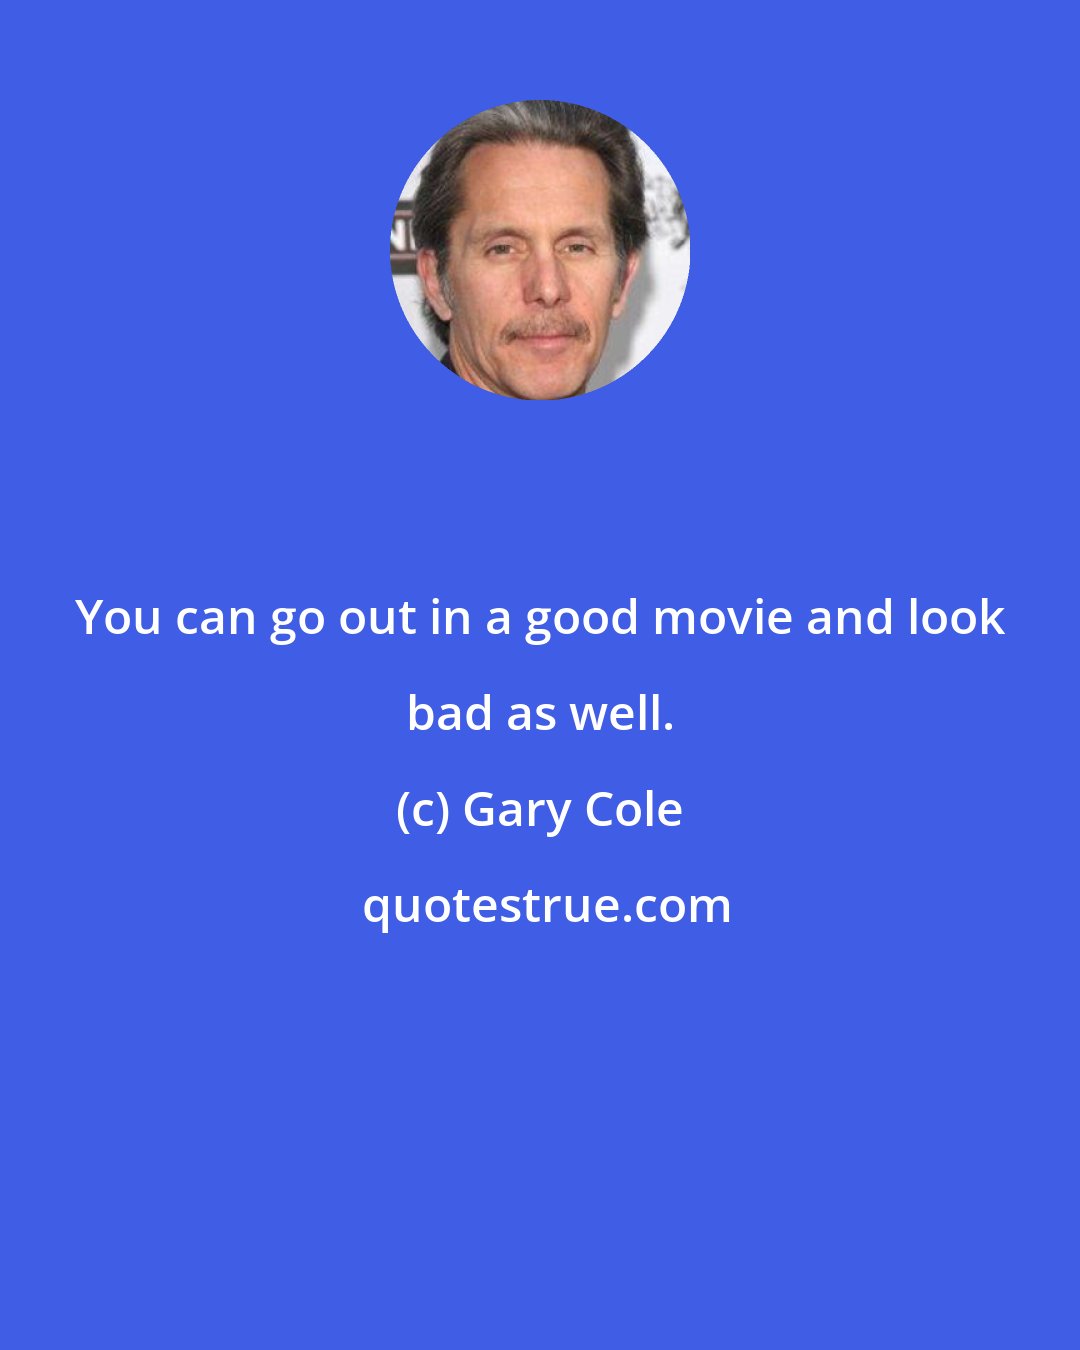 Gary Cole: You can go out in a good movie and look bad as well.